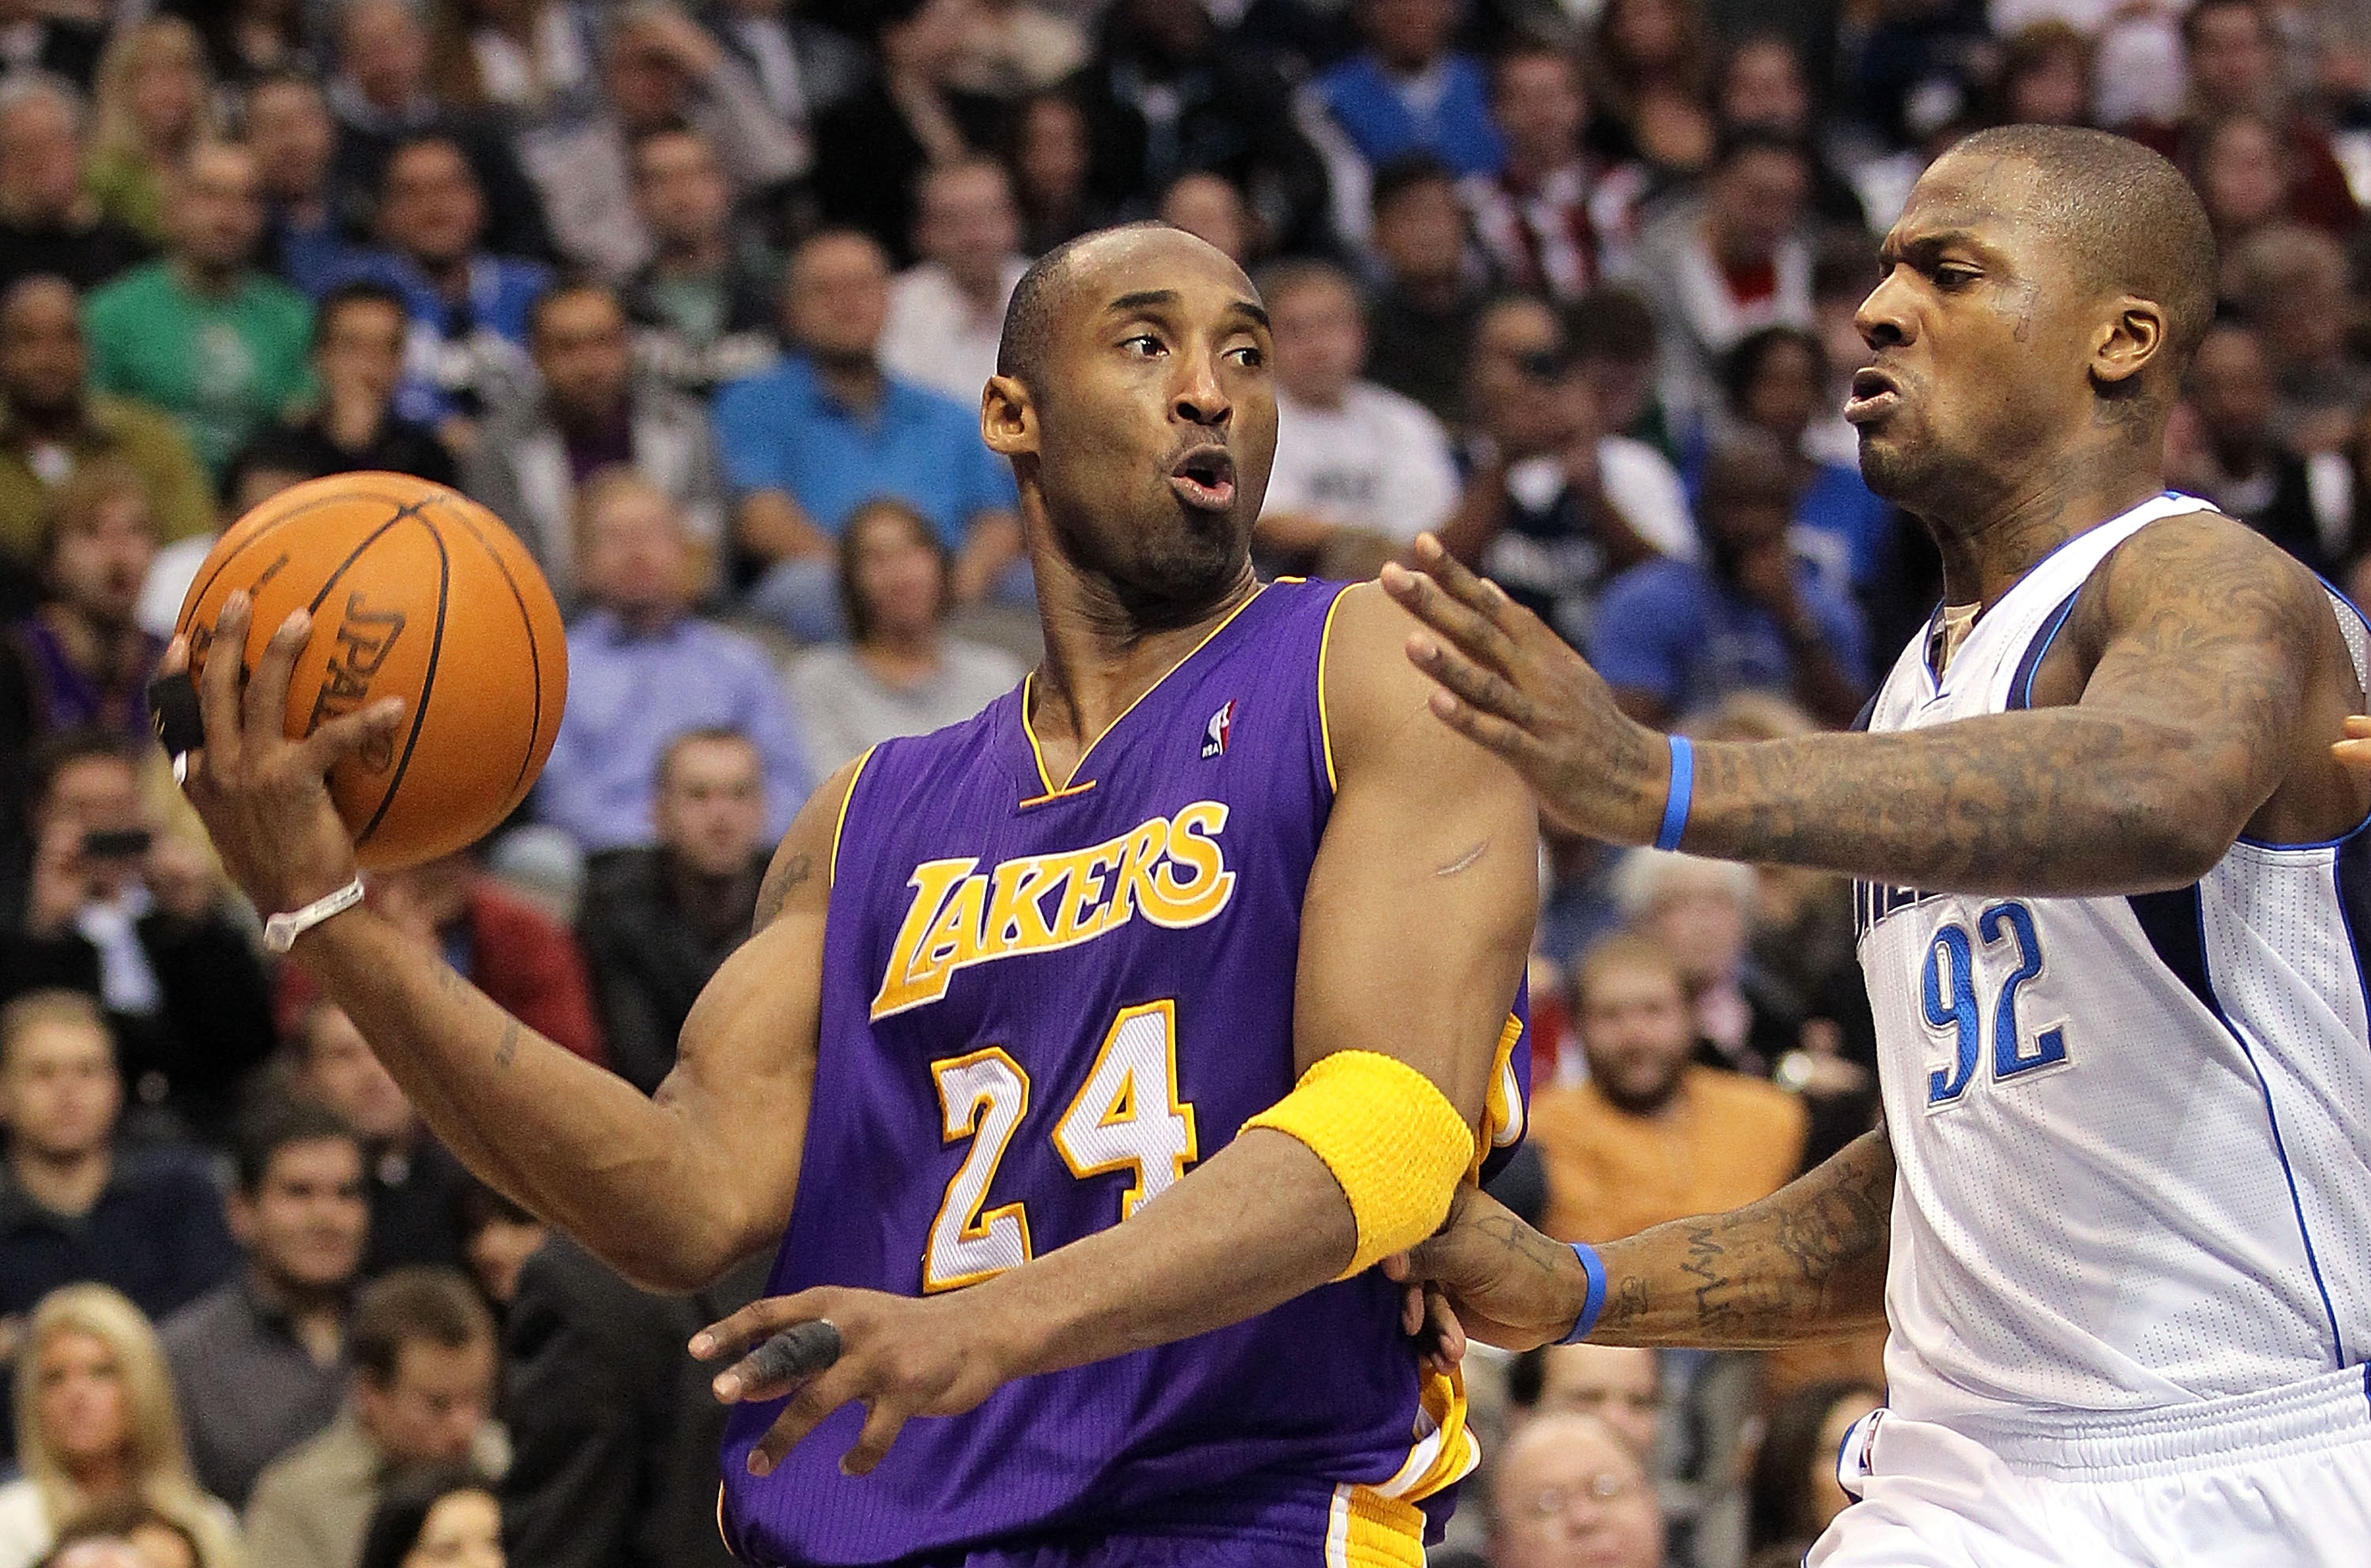 DALLAS, TX - JANUARY 19:  Kobe Bryant #24 of the Los Angeles Lakers at American Airlines Center on January 19, 2011 in Dallas, Texas.  NOTE TO USER: User expressly acknowledges and agrees that, by downloading and or using this photograph, User is consenti